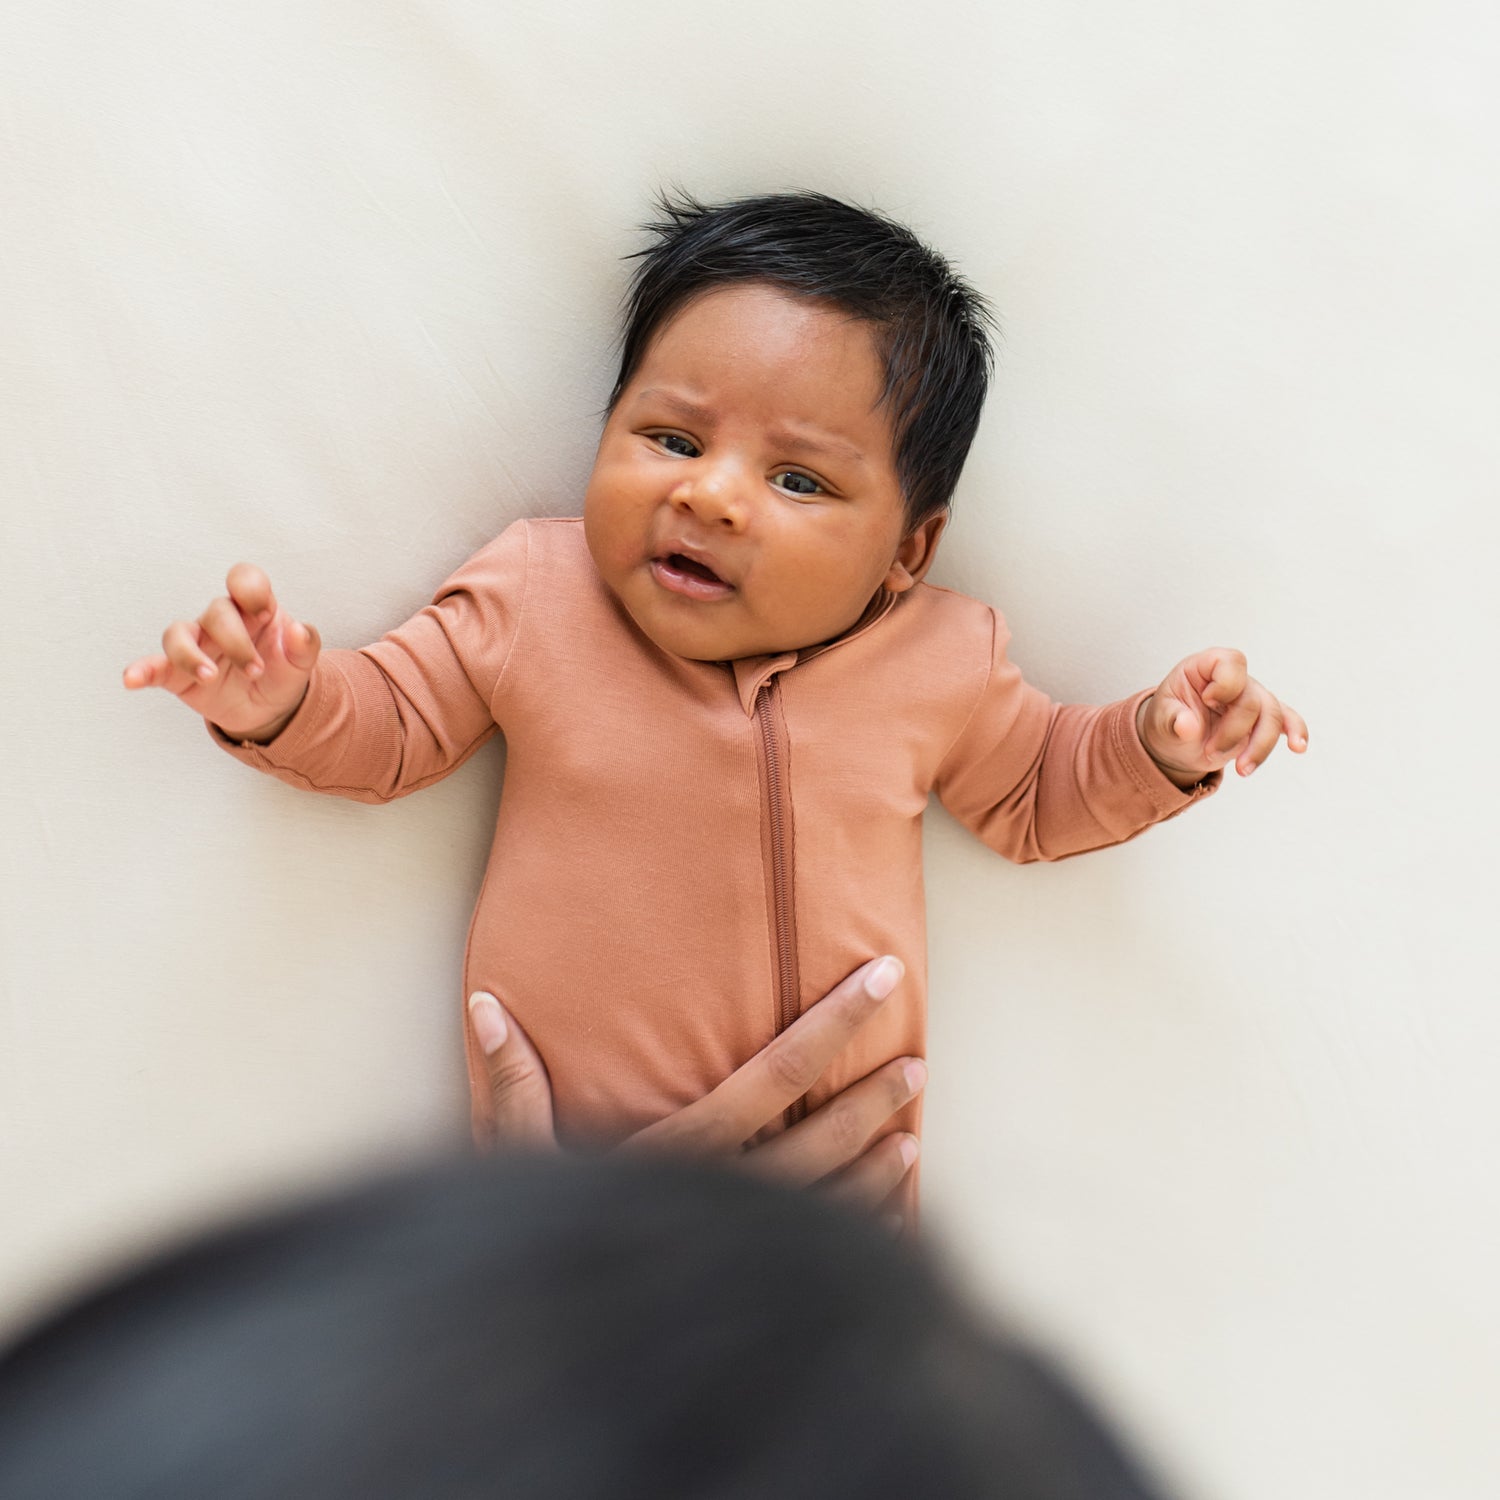 How to Calm a Fussy Baby